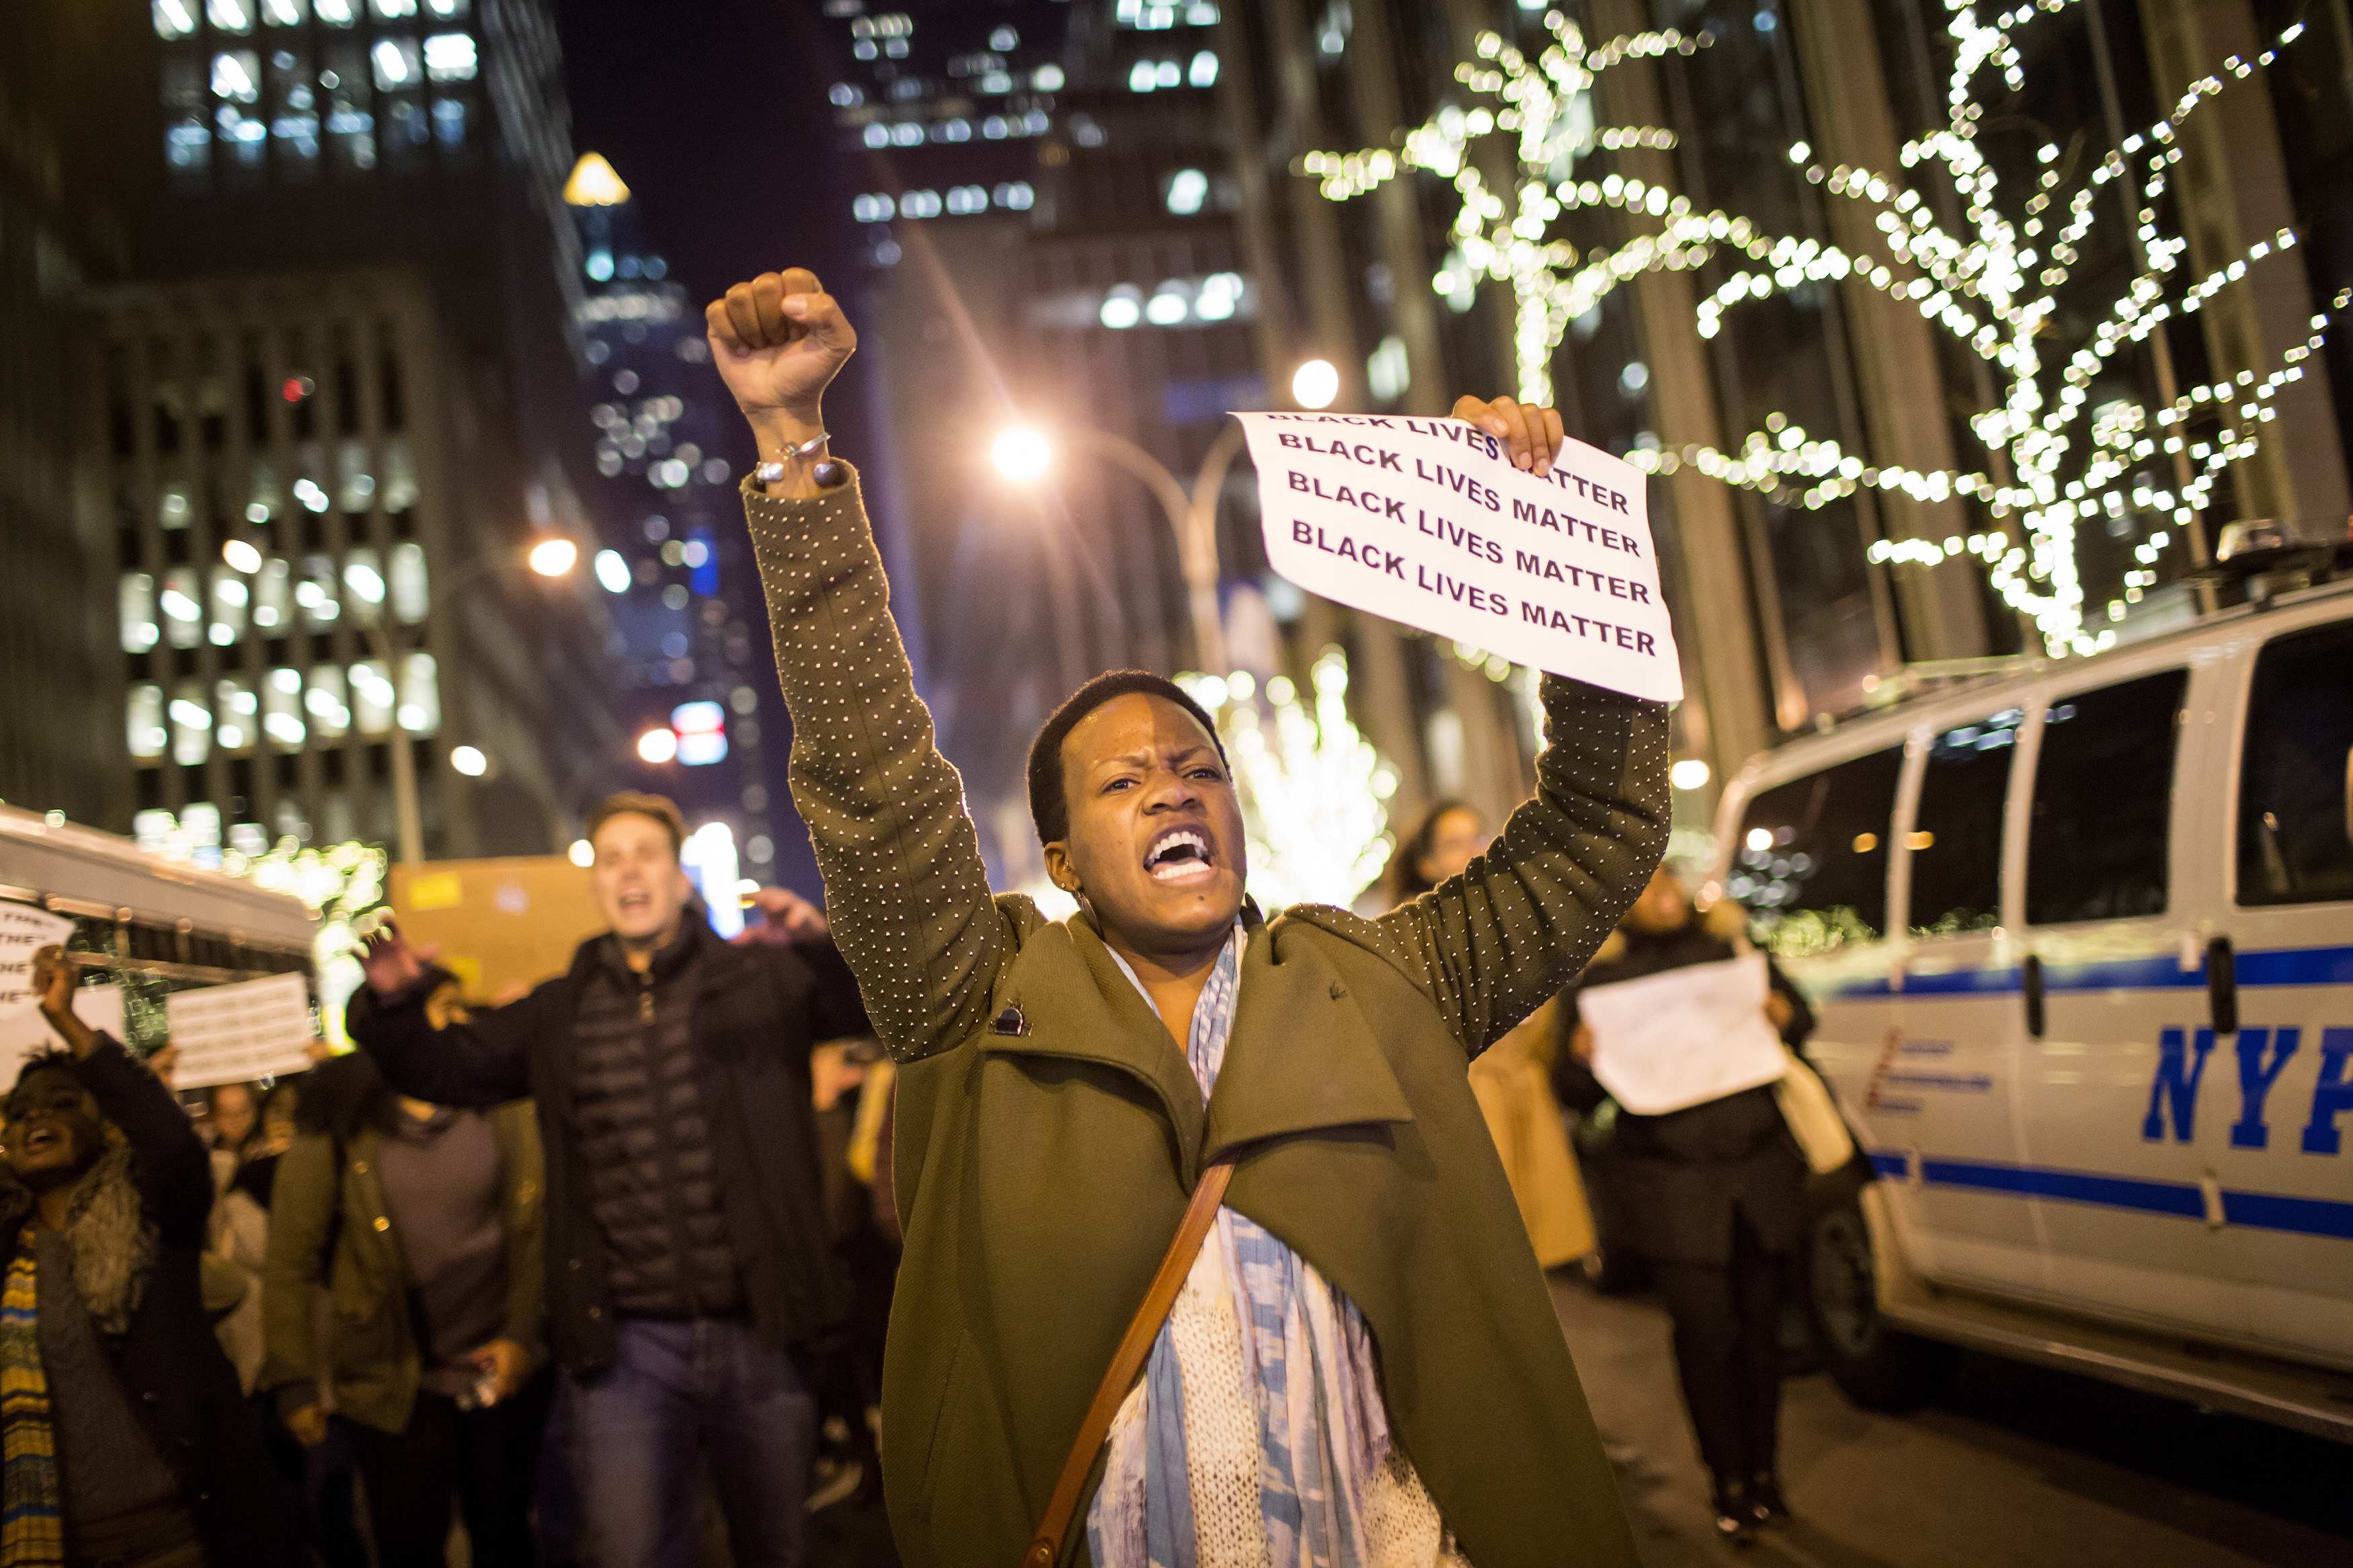 People take part in a protest against the grand jury decision on the death of Eric Garner in midtown Manhattan in New York